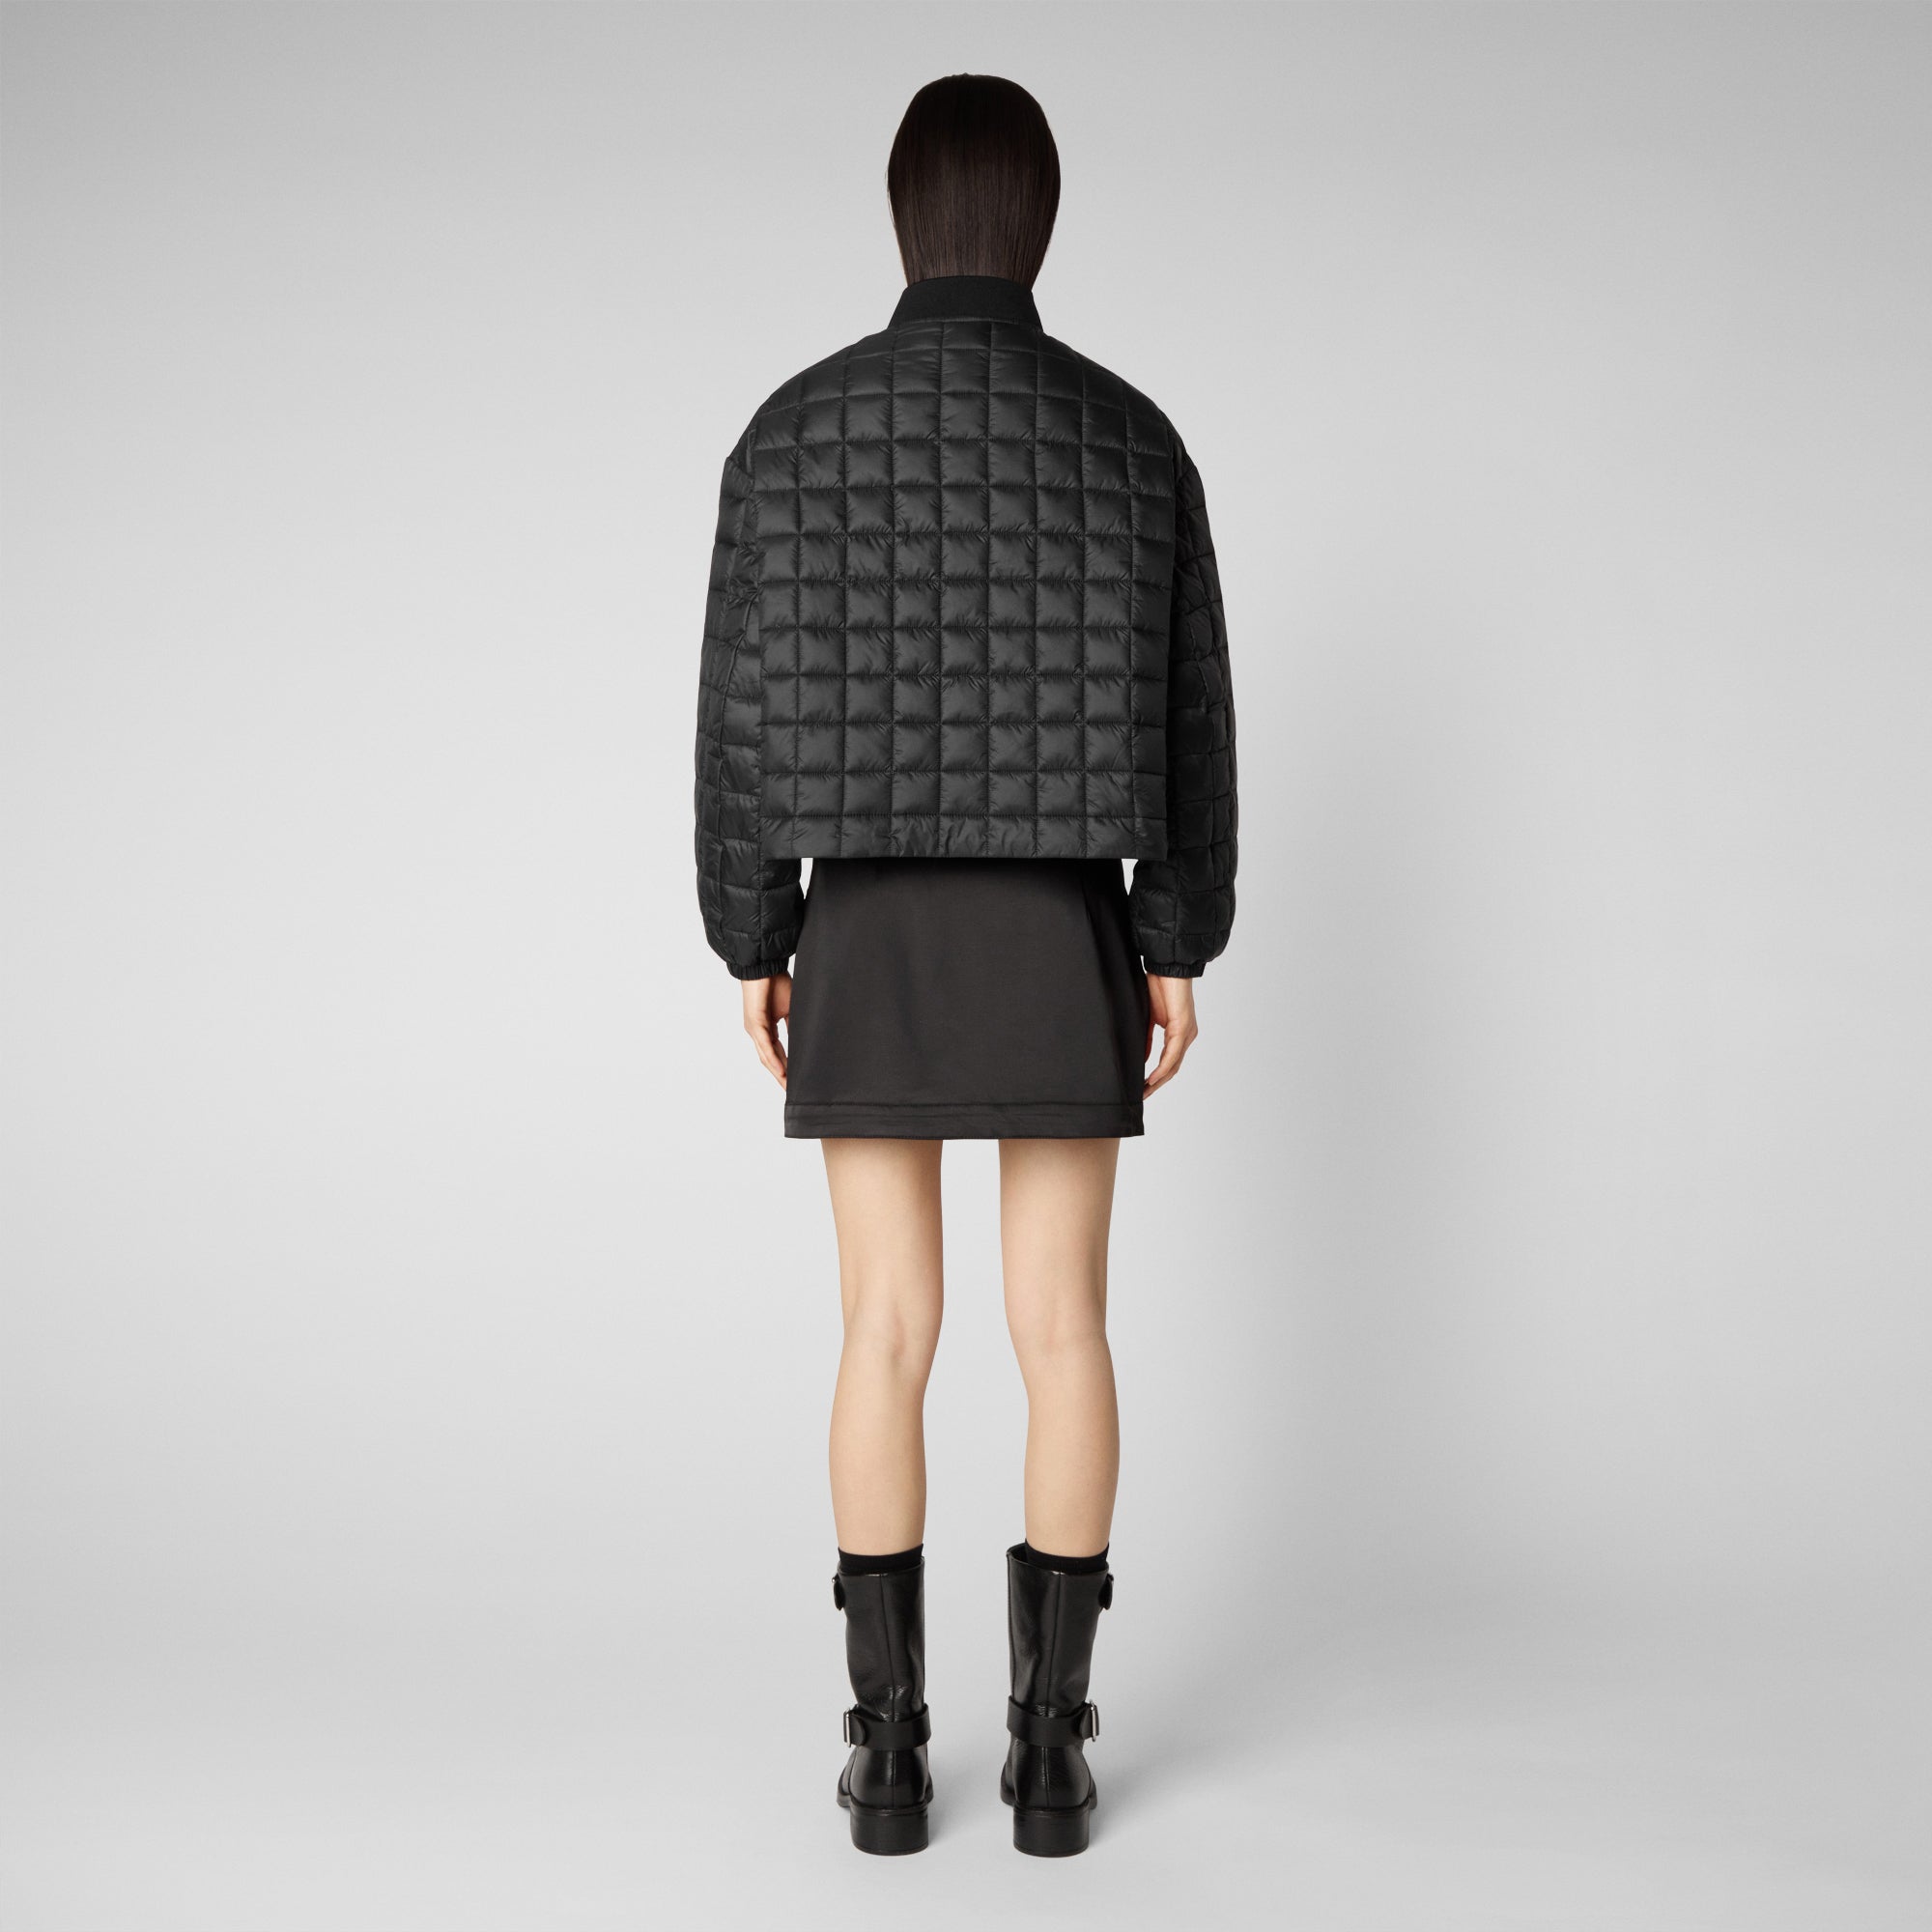 TESSA:SAVE THE DUCK WOMAN JACKET in GIGA in Black